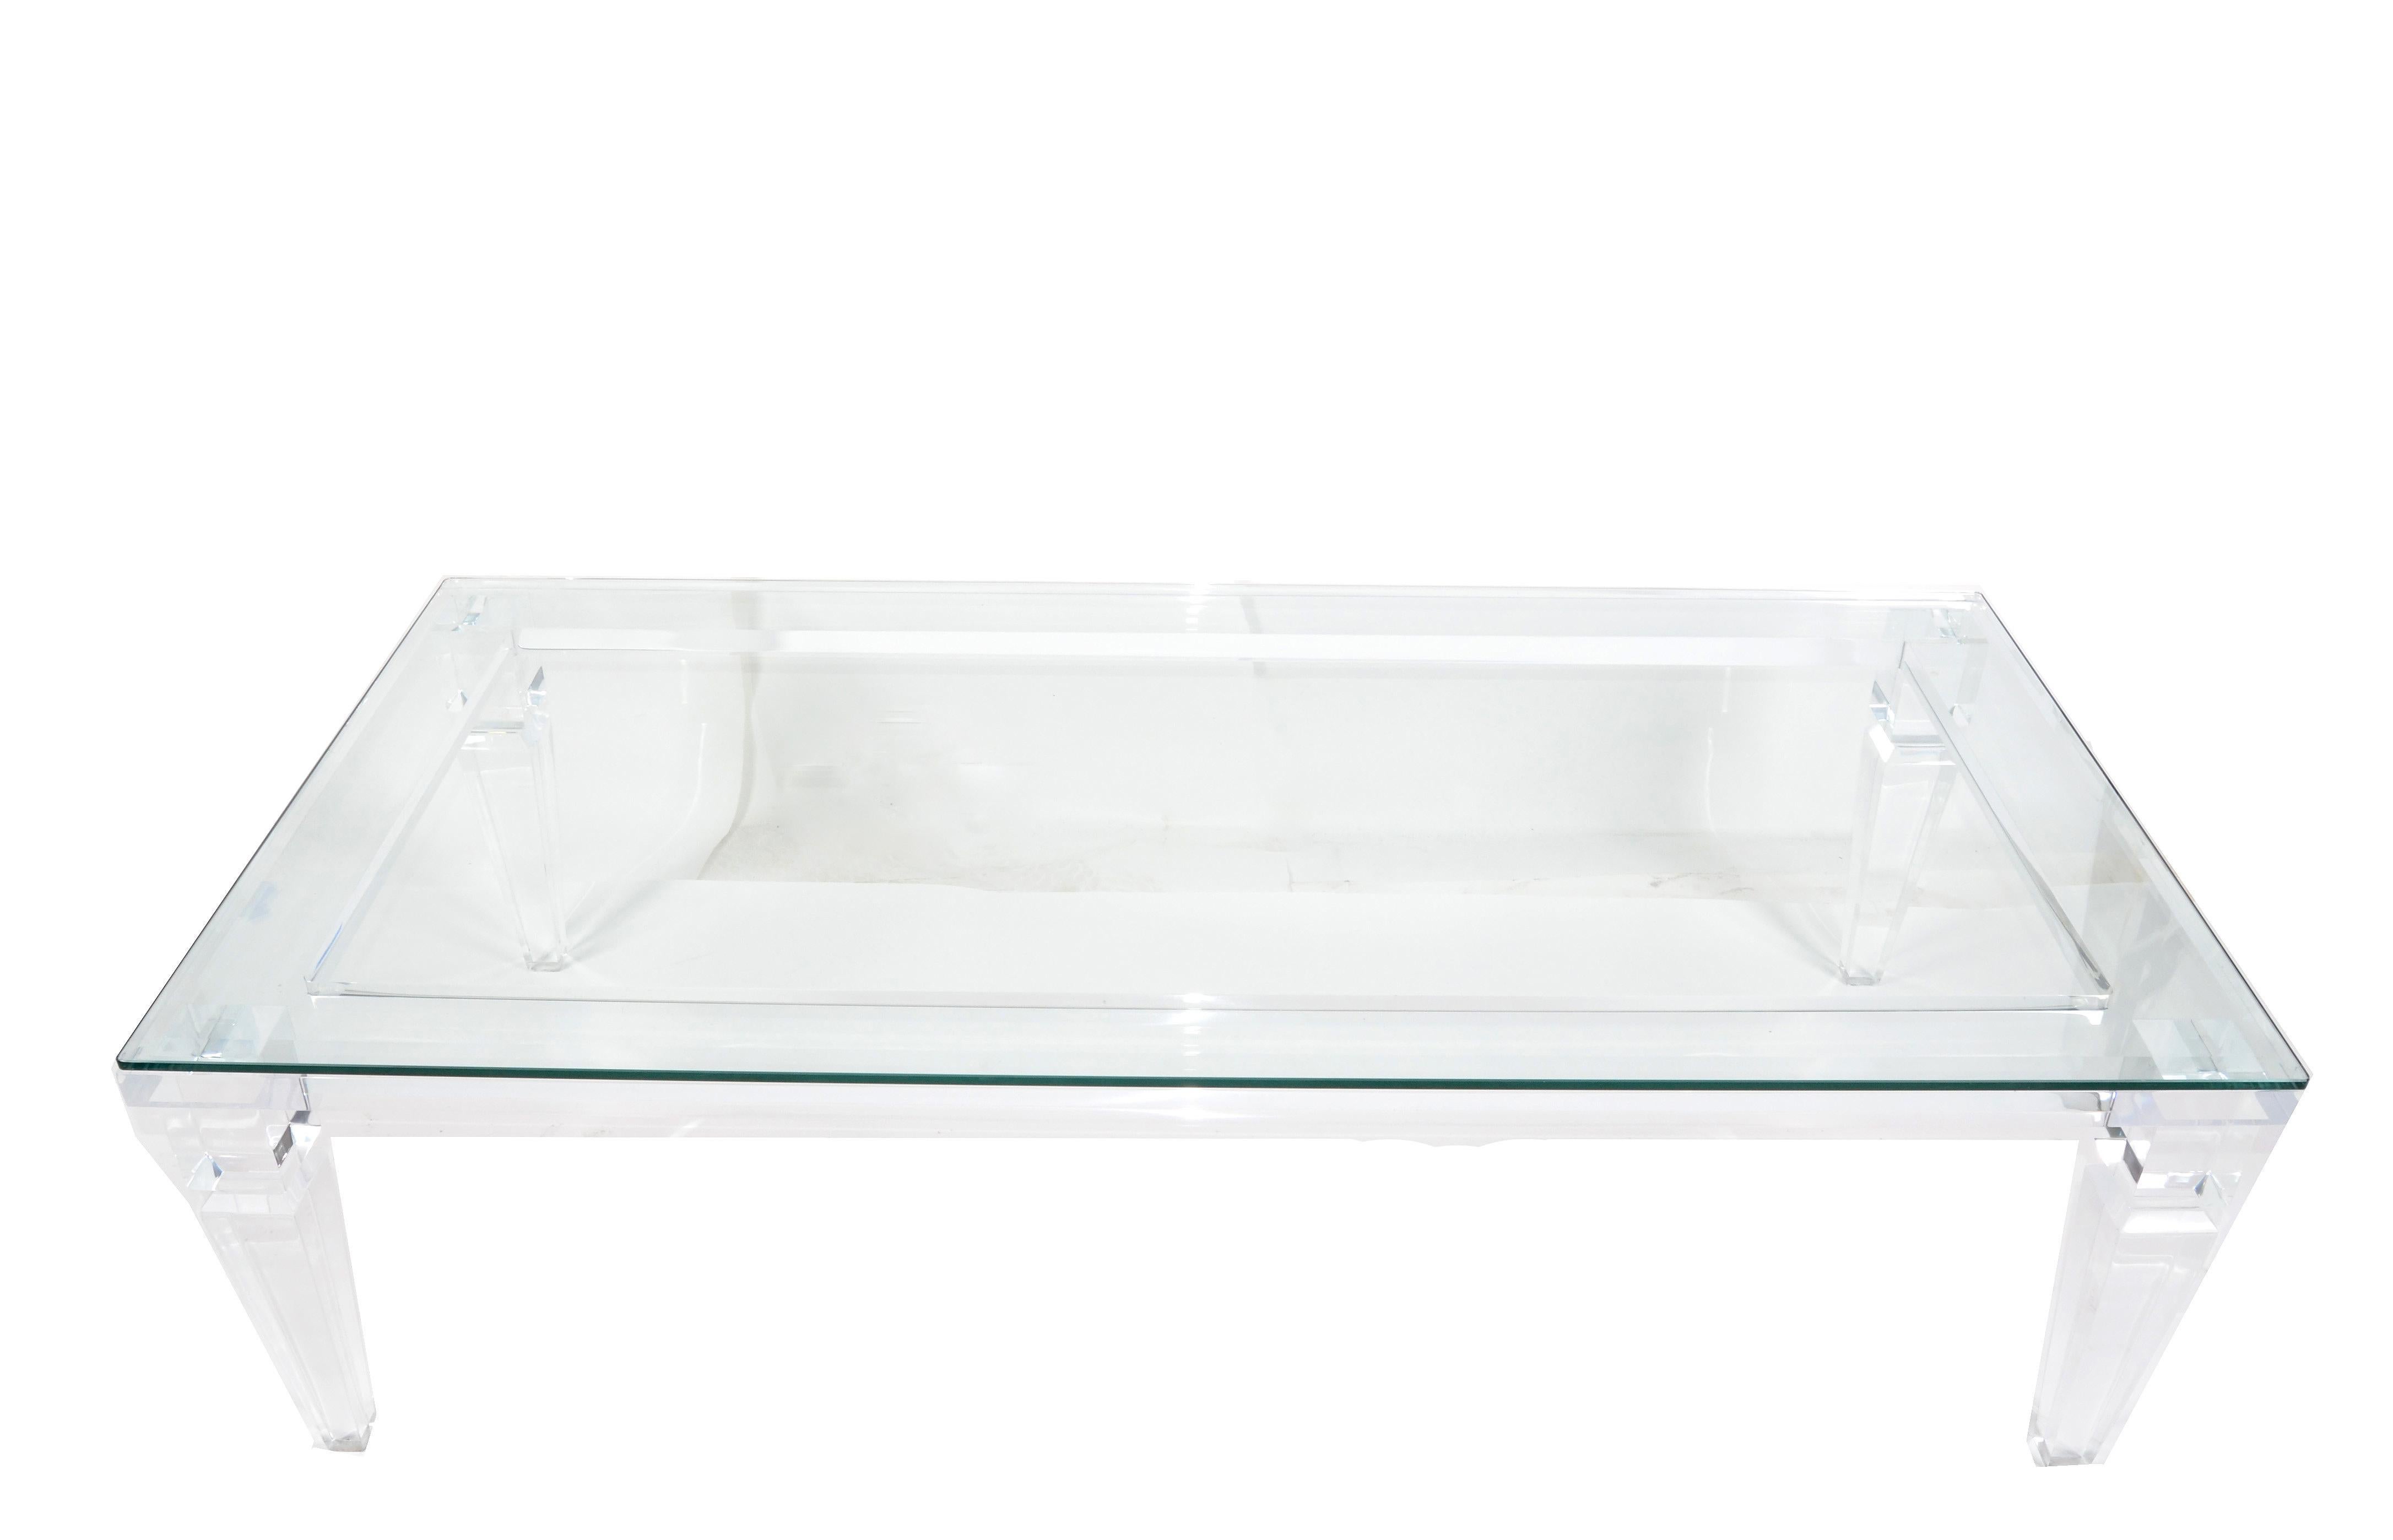 1970s rectangular Lucite and beveled glass coffee table with tapered Lucite legs by Charles Hollis Jones.
Lucite frame constructed with sturdy and durable carved Lucite Legs.
Features a 3/8 inches thick clear glass top which rests on the frame.
 